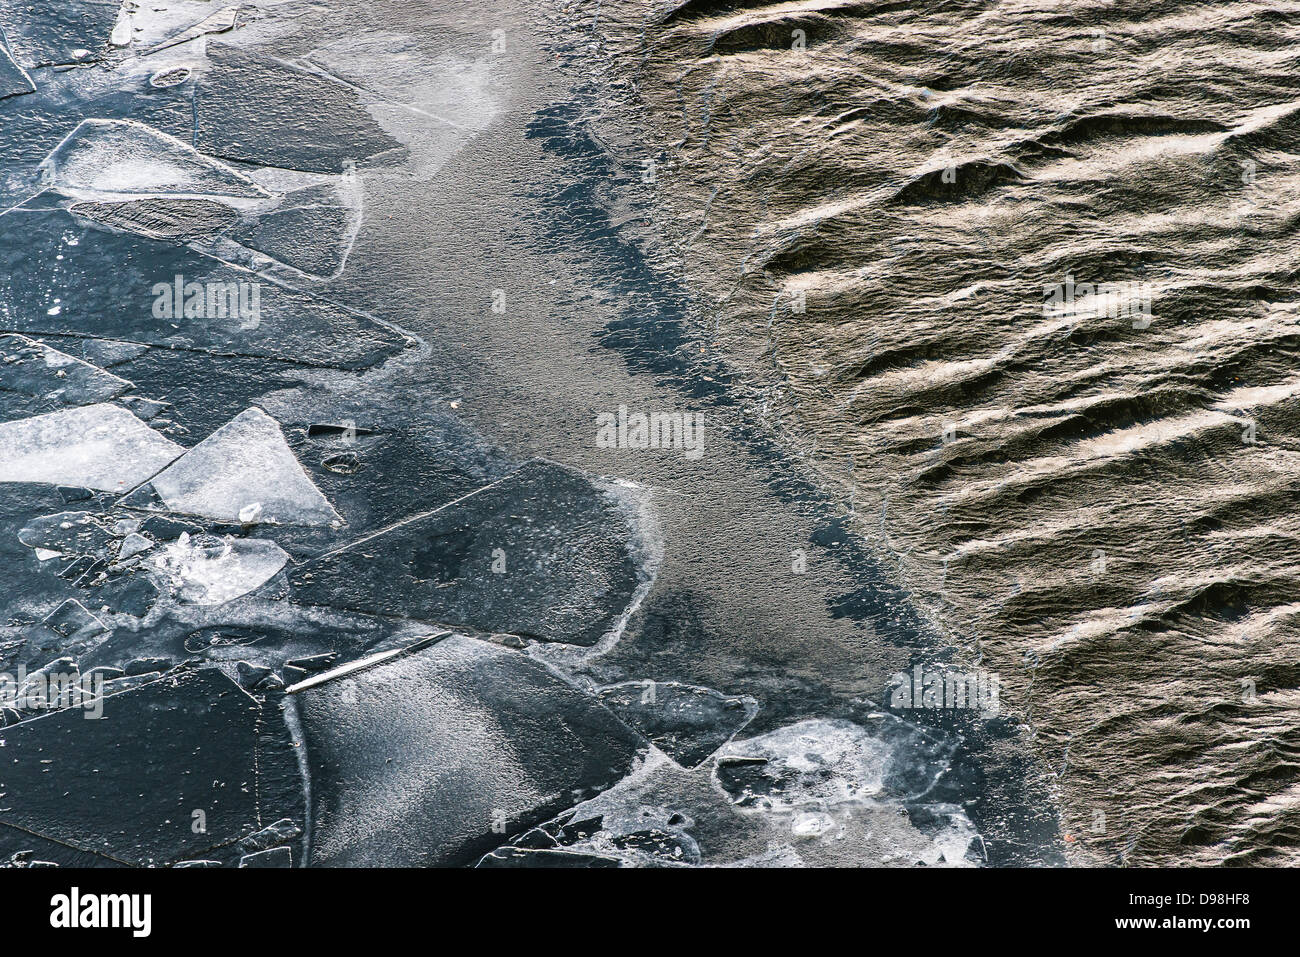 High angle view of water at spring with the ice partly melted. Stockholm, Sweden. Stock Photo